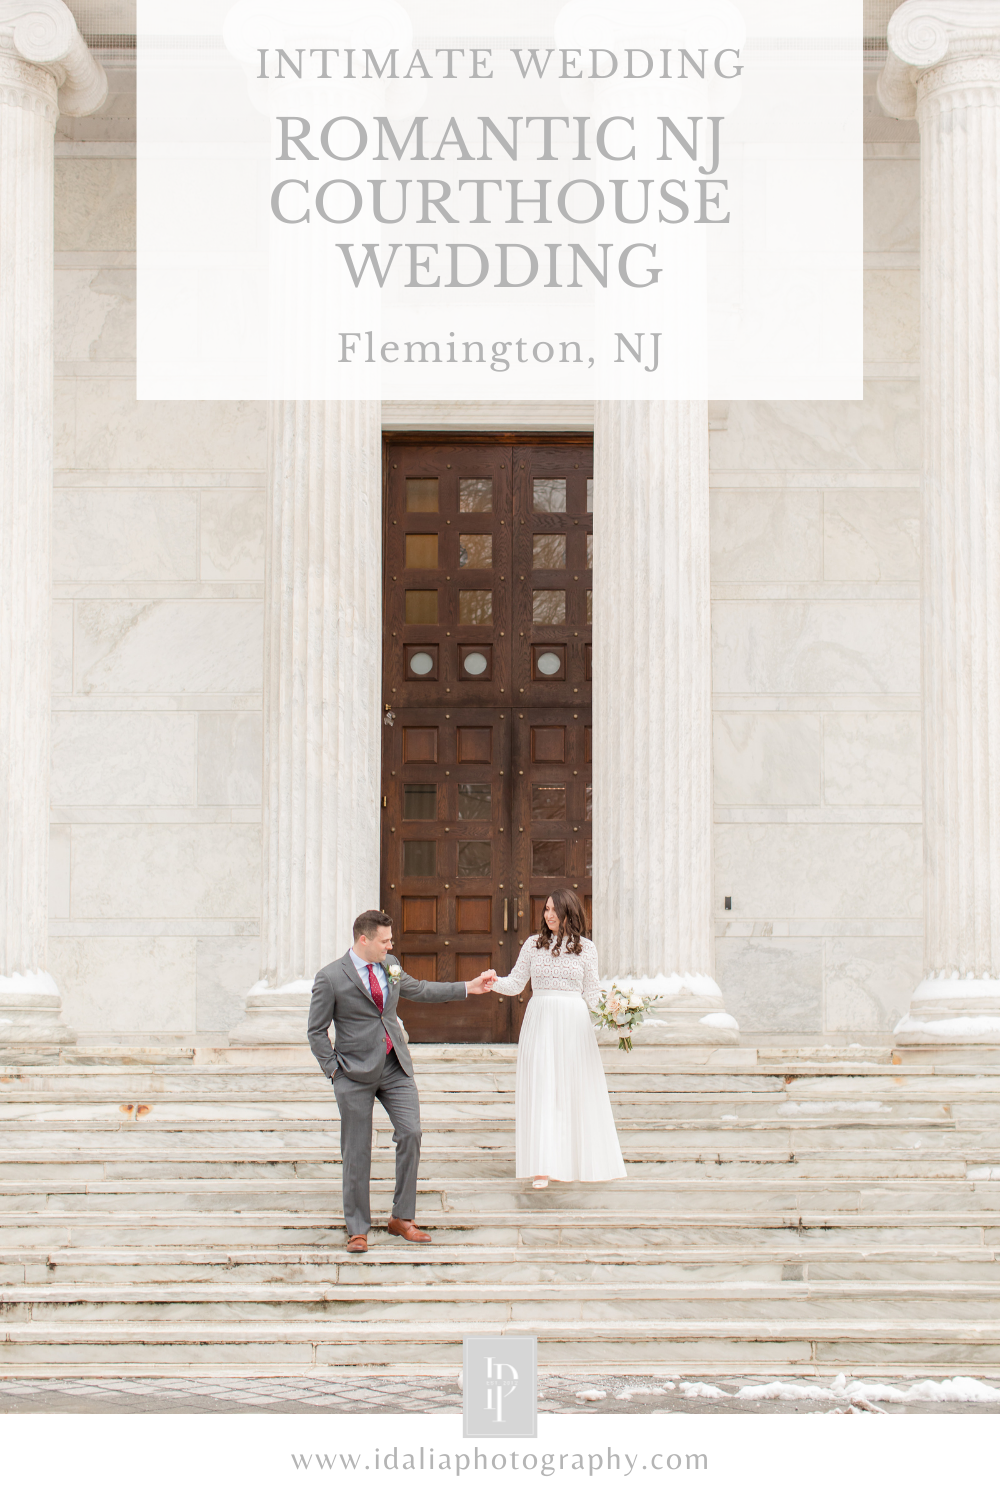 Winter wedding in New Jersey courthouse